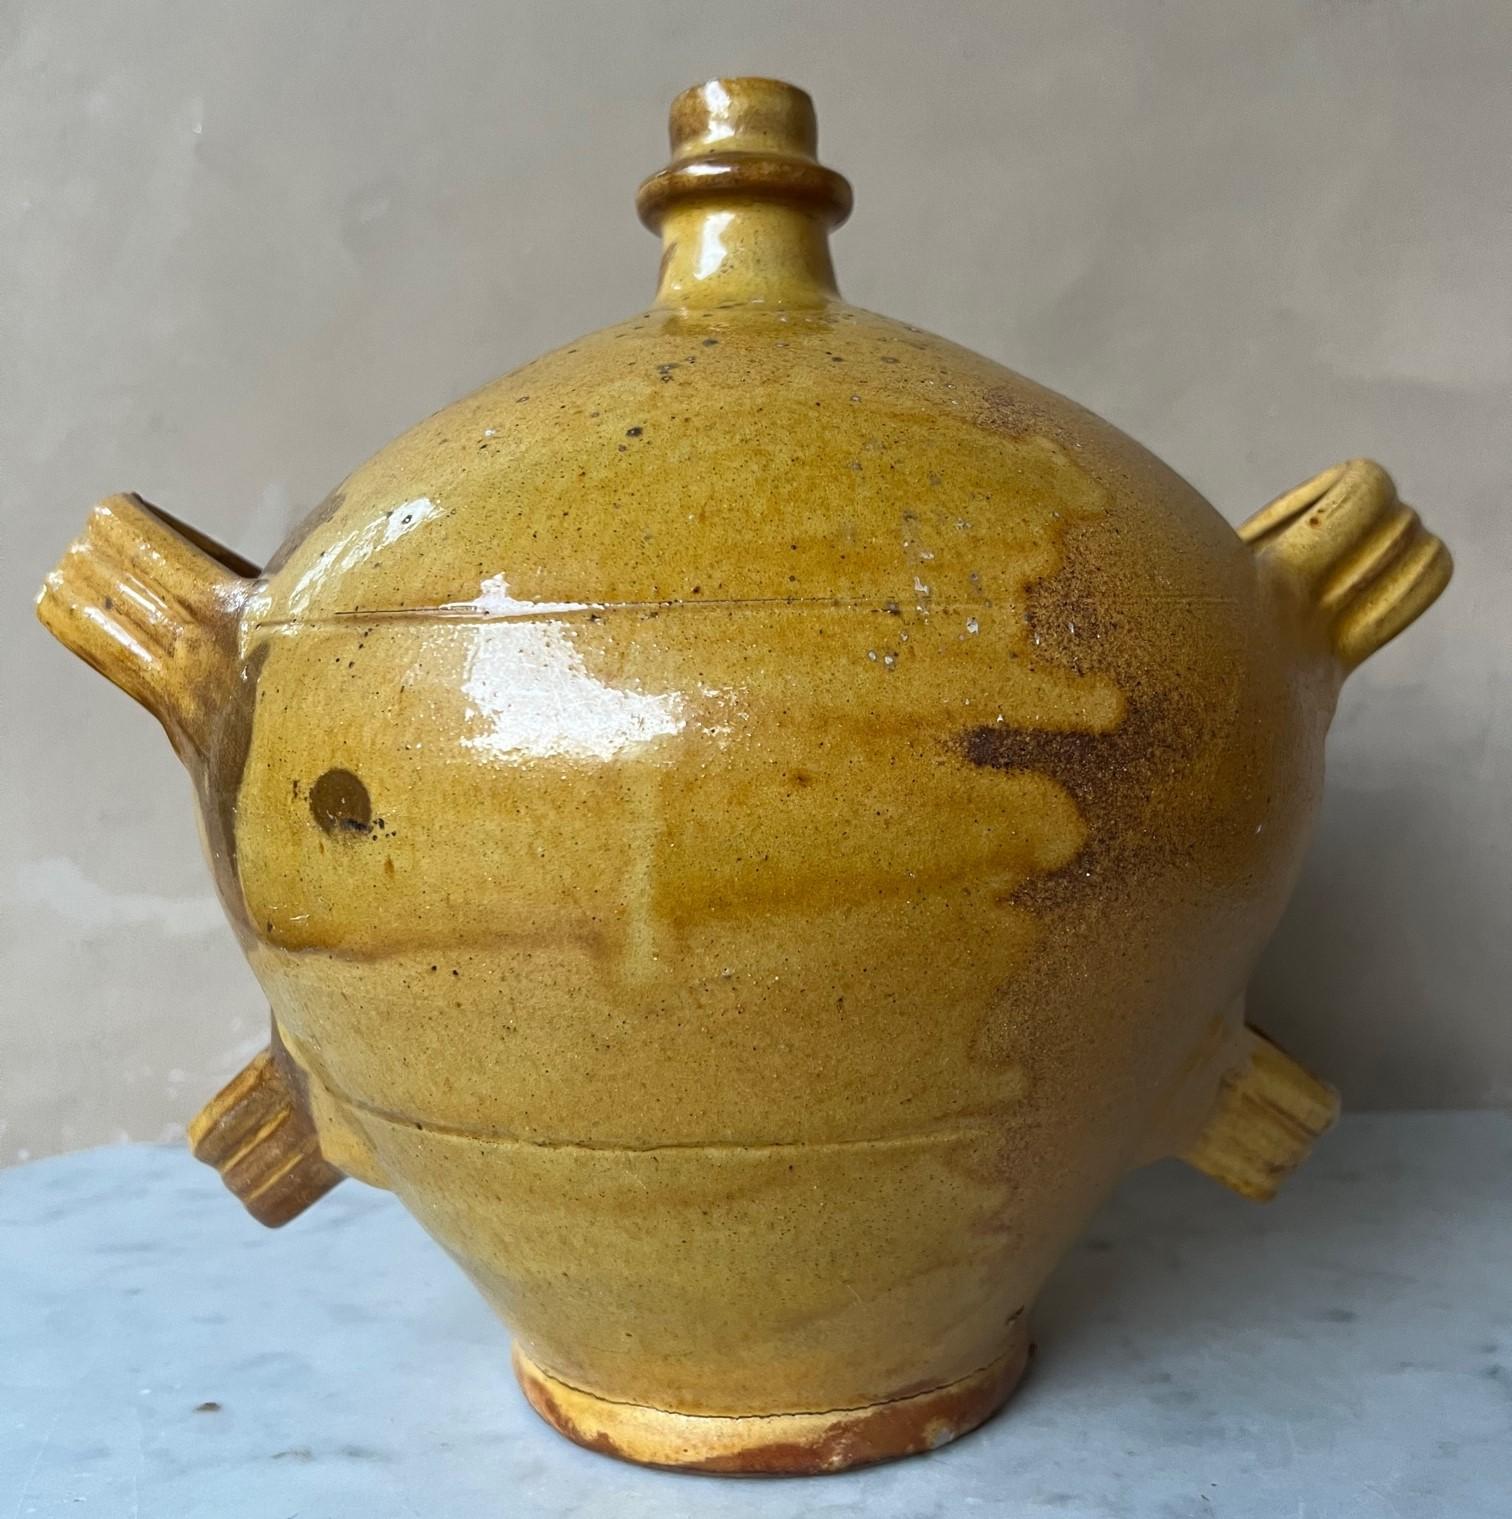 Vintage French mustard glazed water or wine jug, handmade with applied handles. These jugs are called Veritasse/Buret which means rare style. Jute rope was originally threaded through the handles to carry the jug.